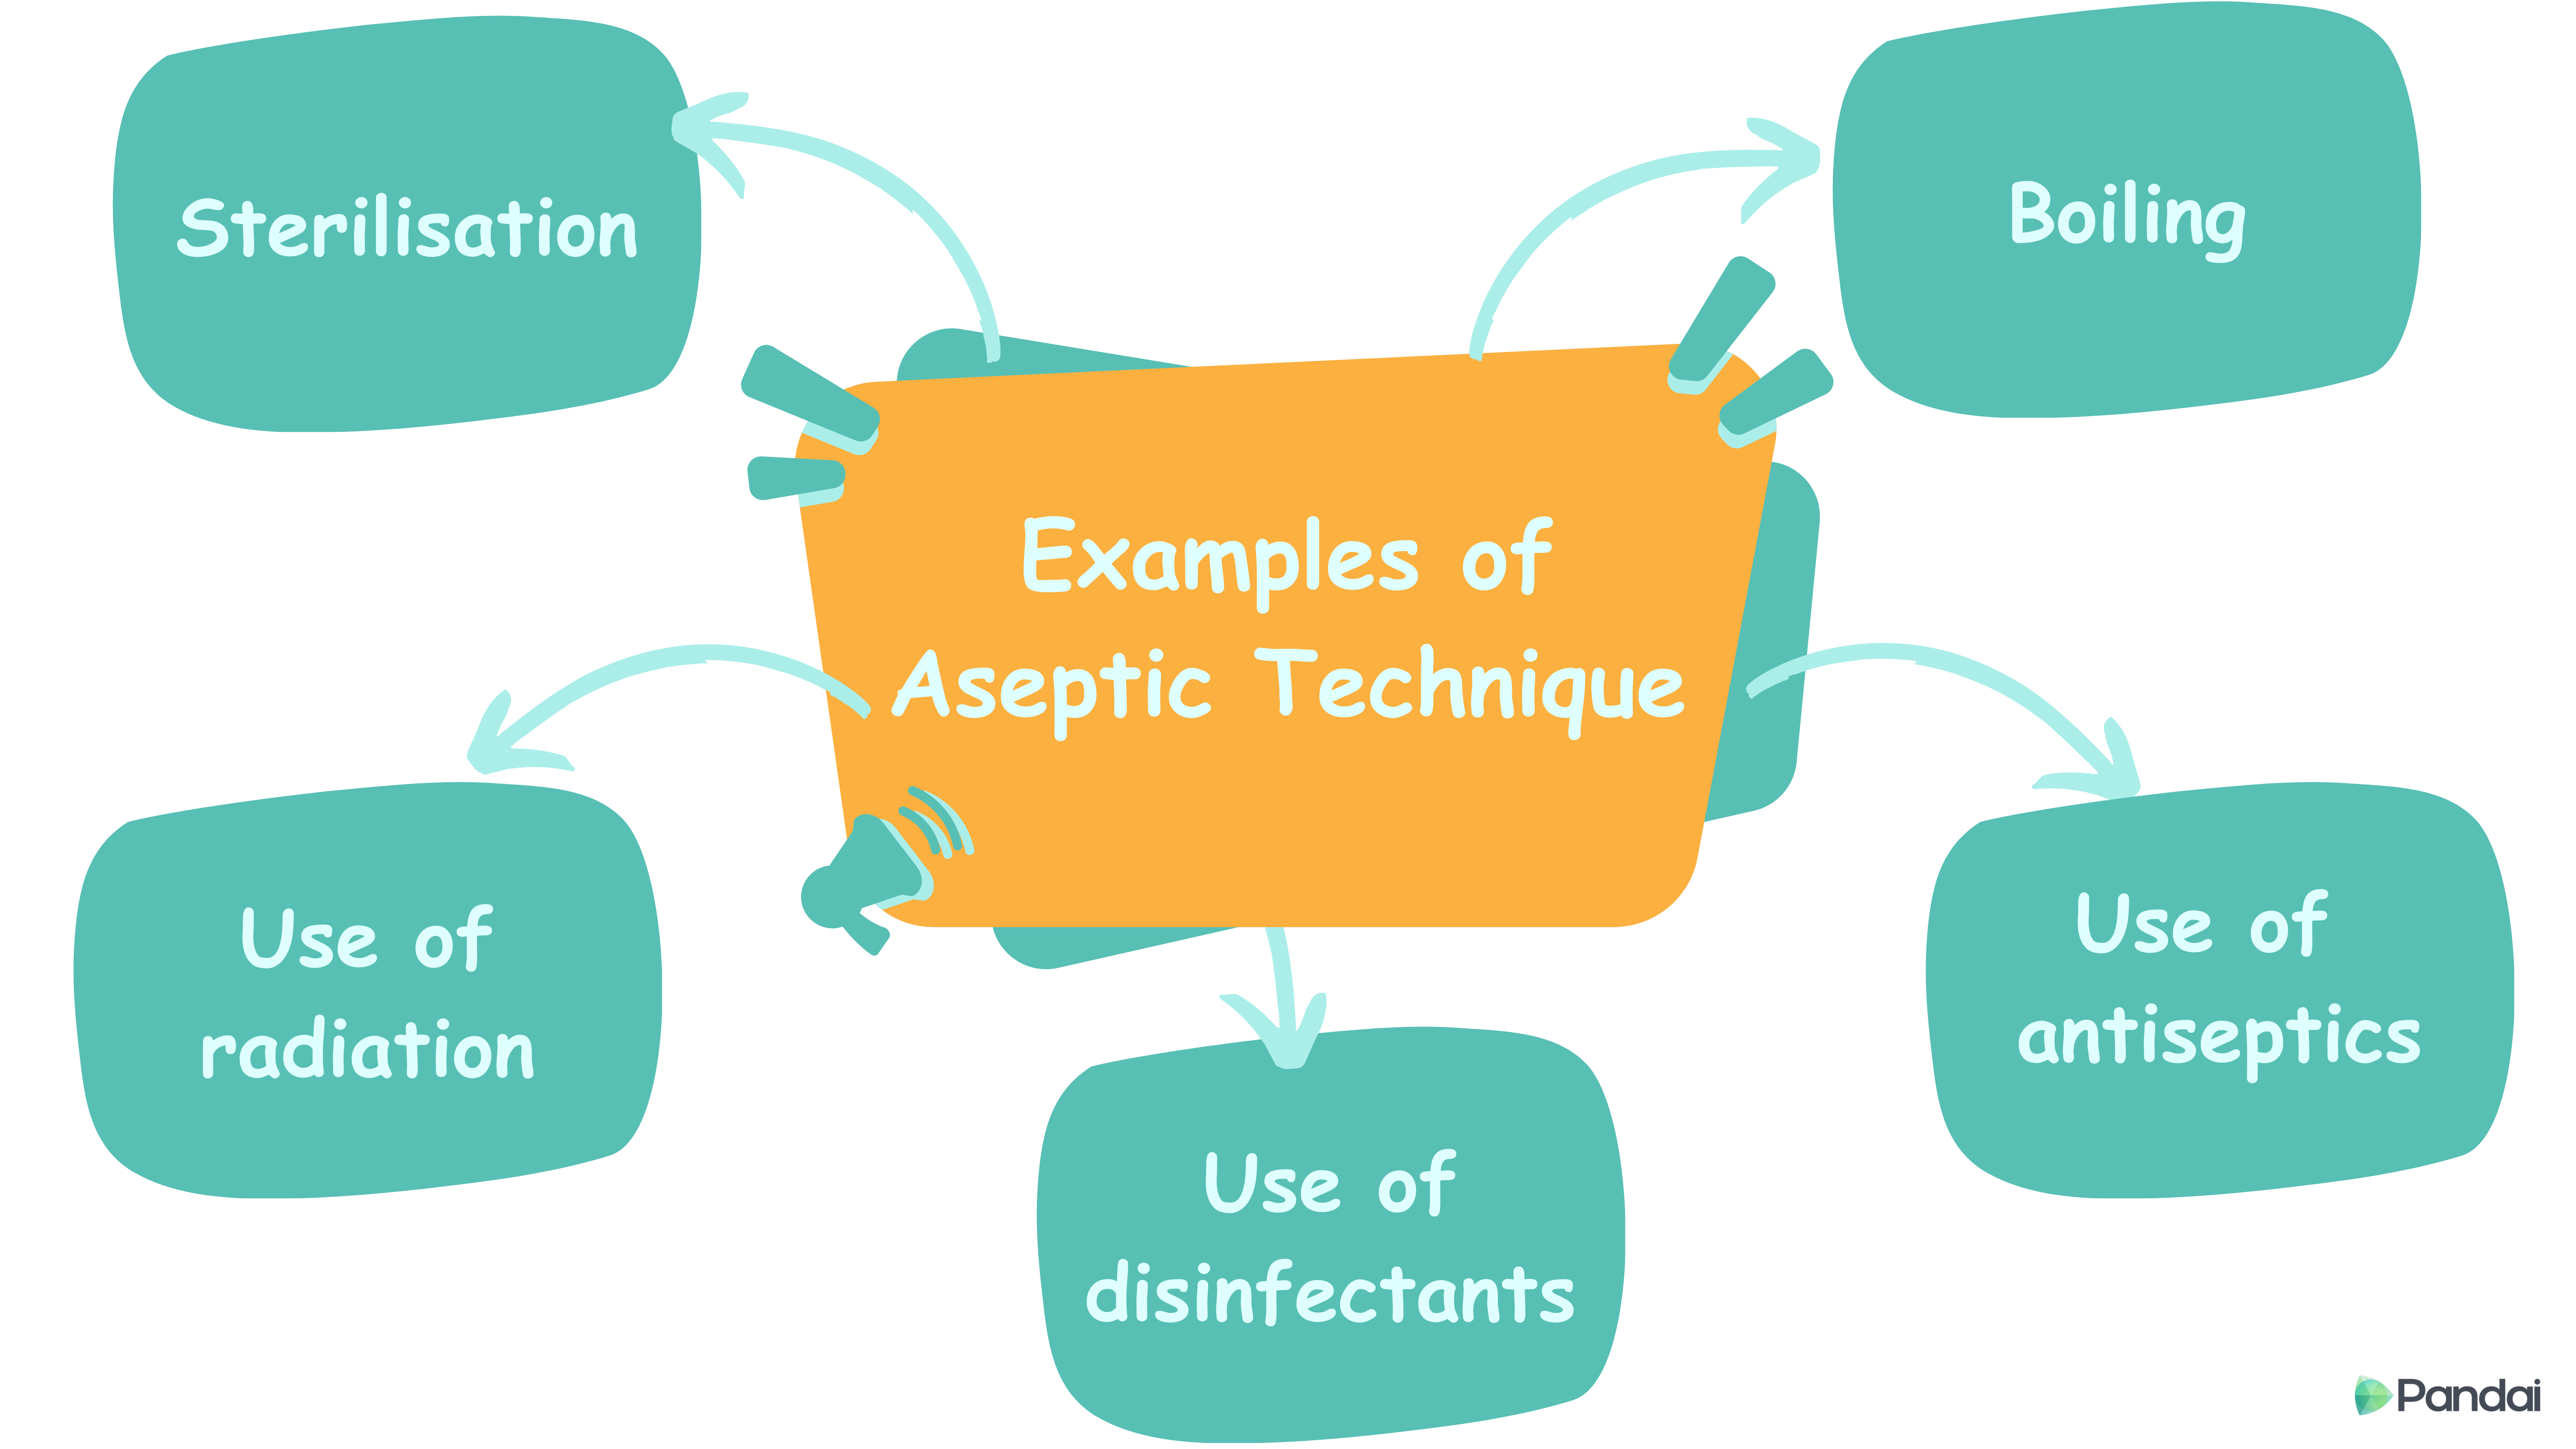 Examples of Aseptic Technique